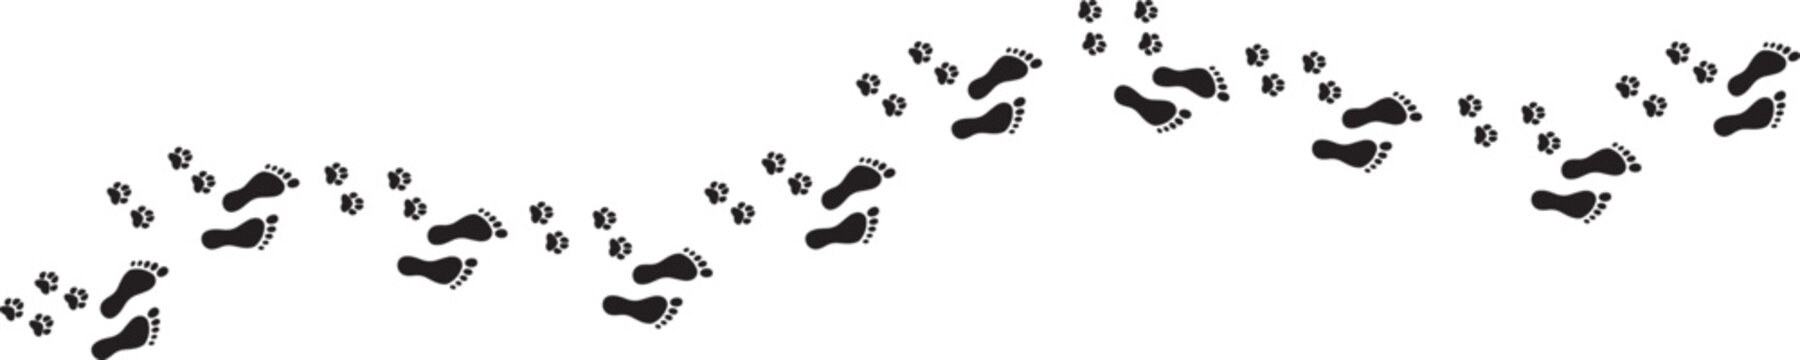 Paw print trail on white background. Vector cat or dog and man, pawprint walk line path pattern background